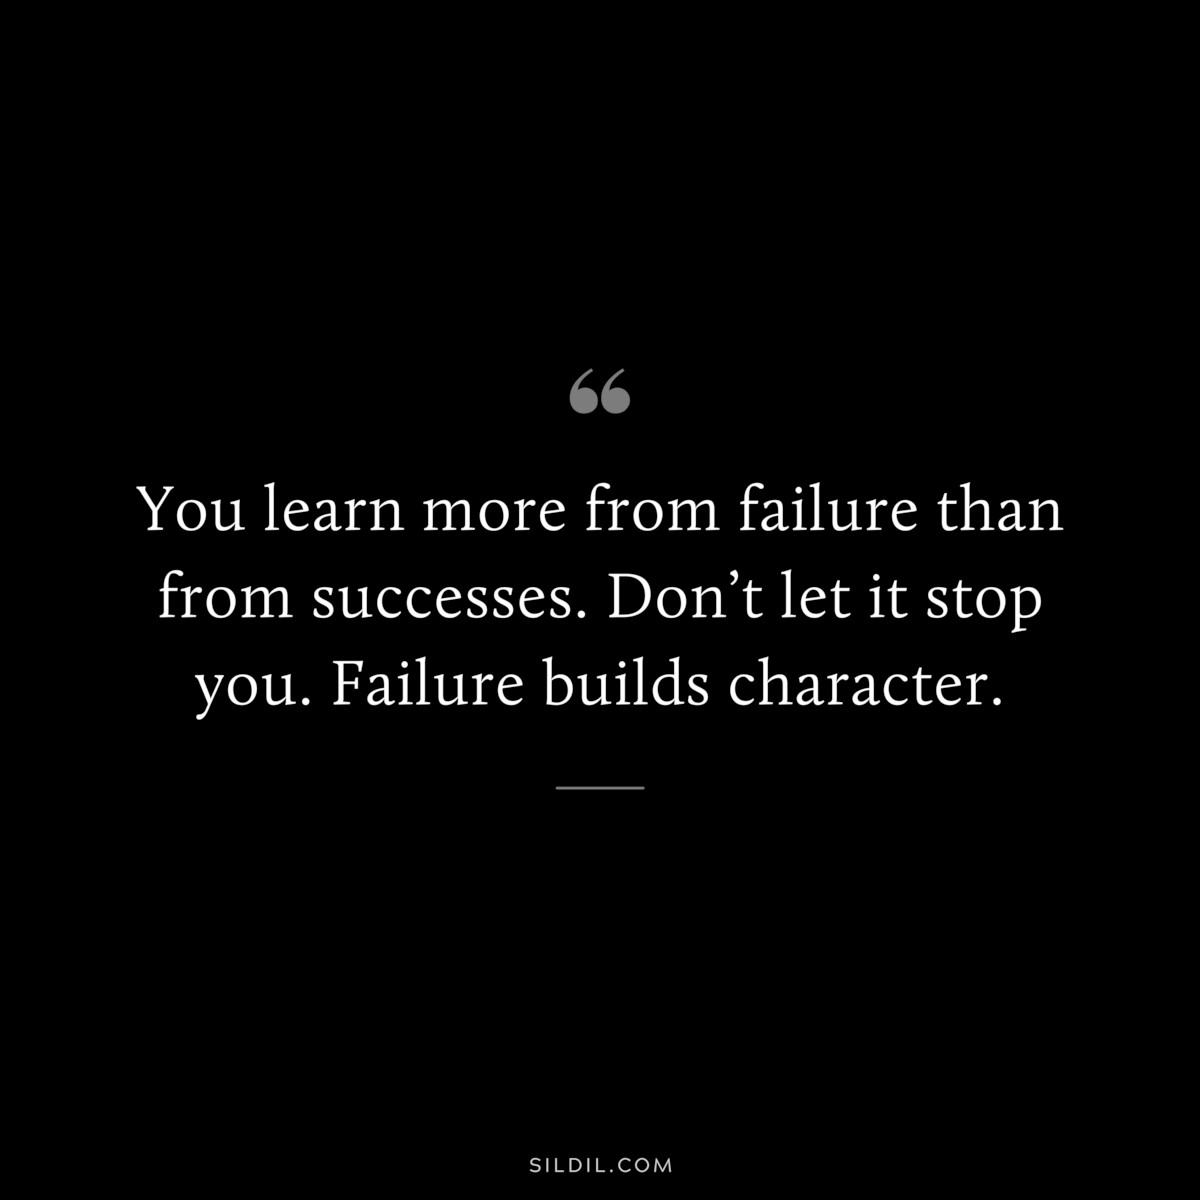 You learn more from failure than from successes. Don’t let it stop you. Failure builds character.